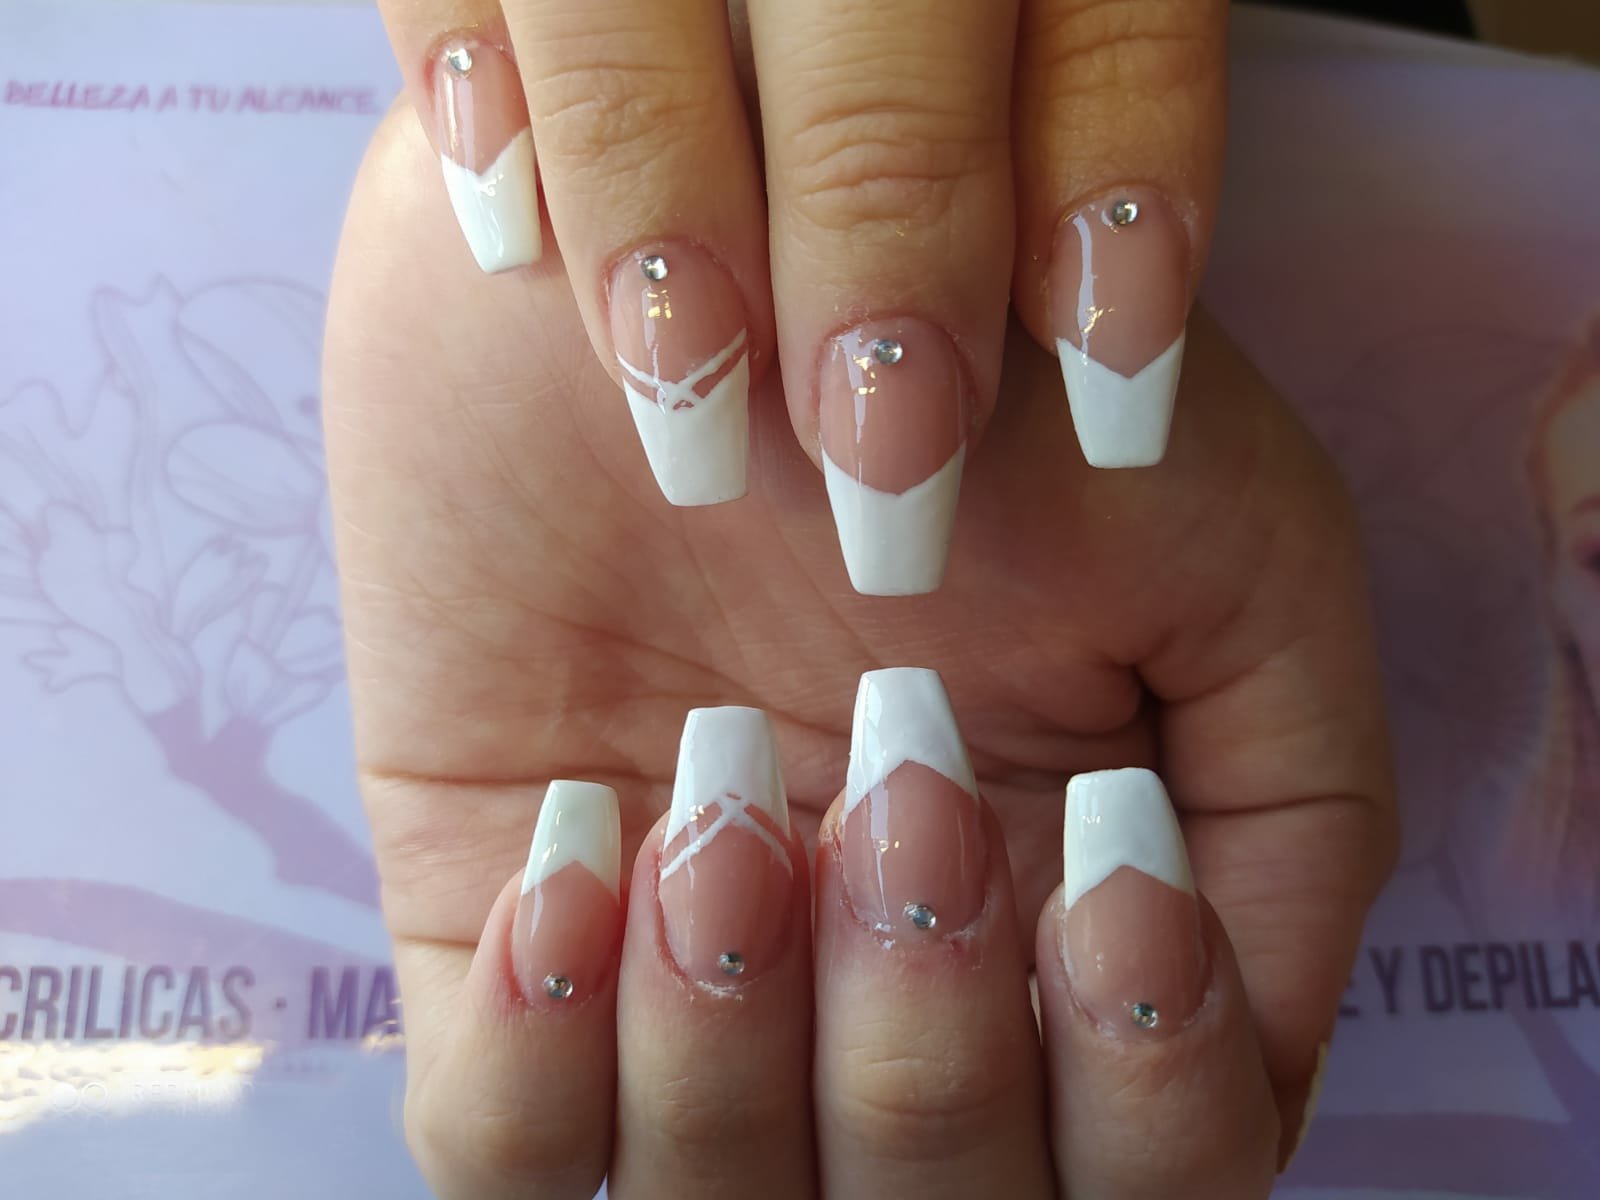 Nailsanes on Twitter: 